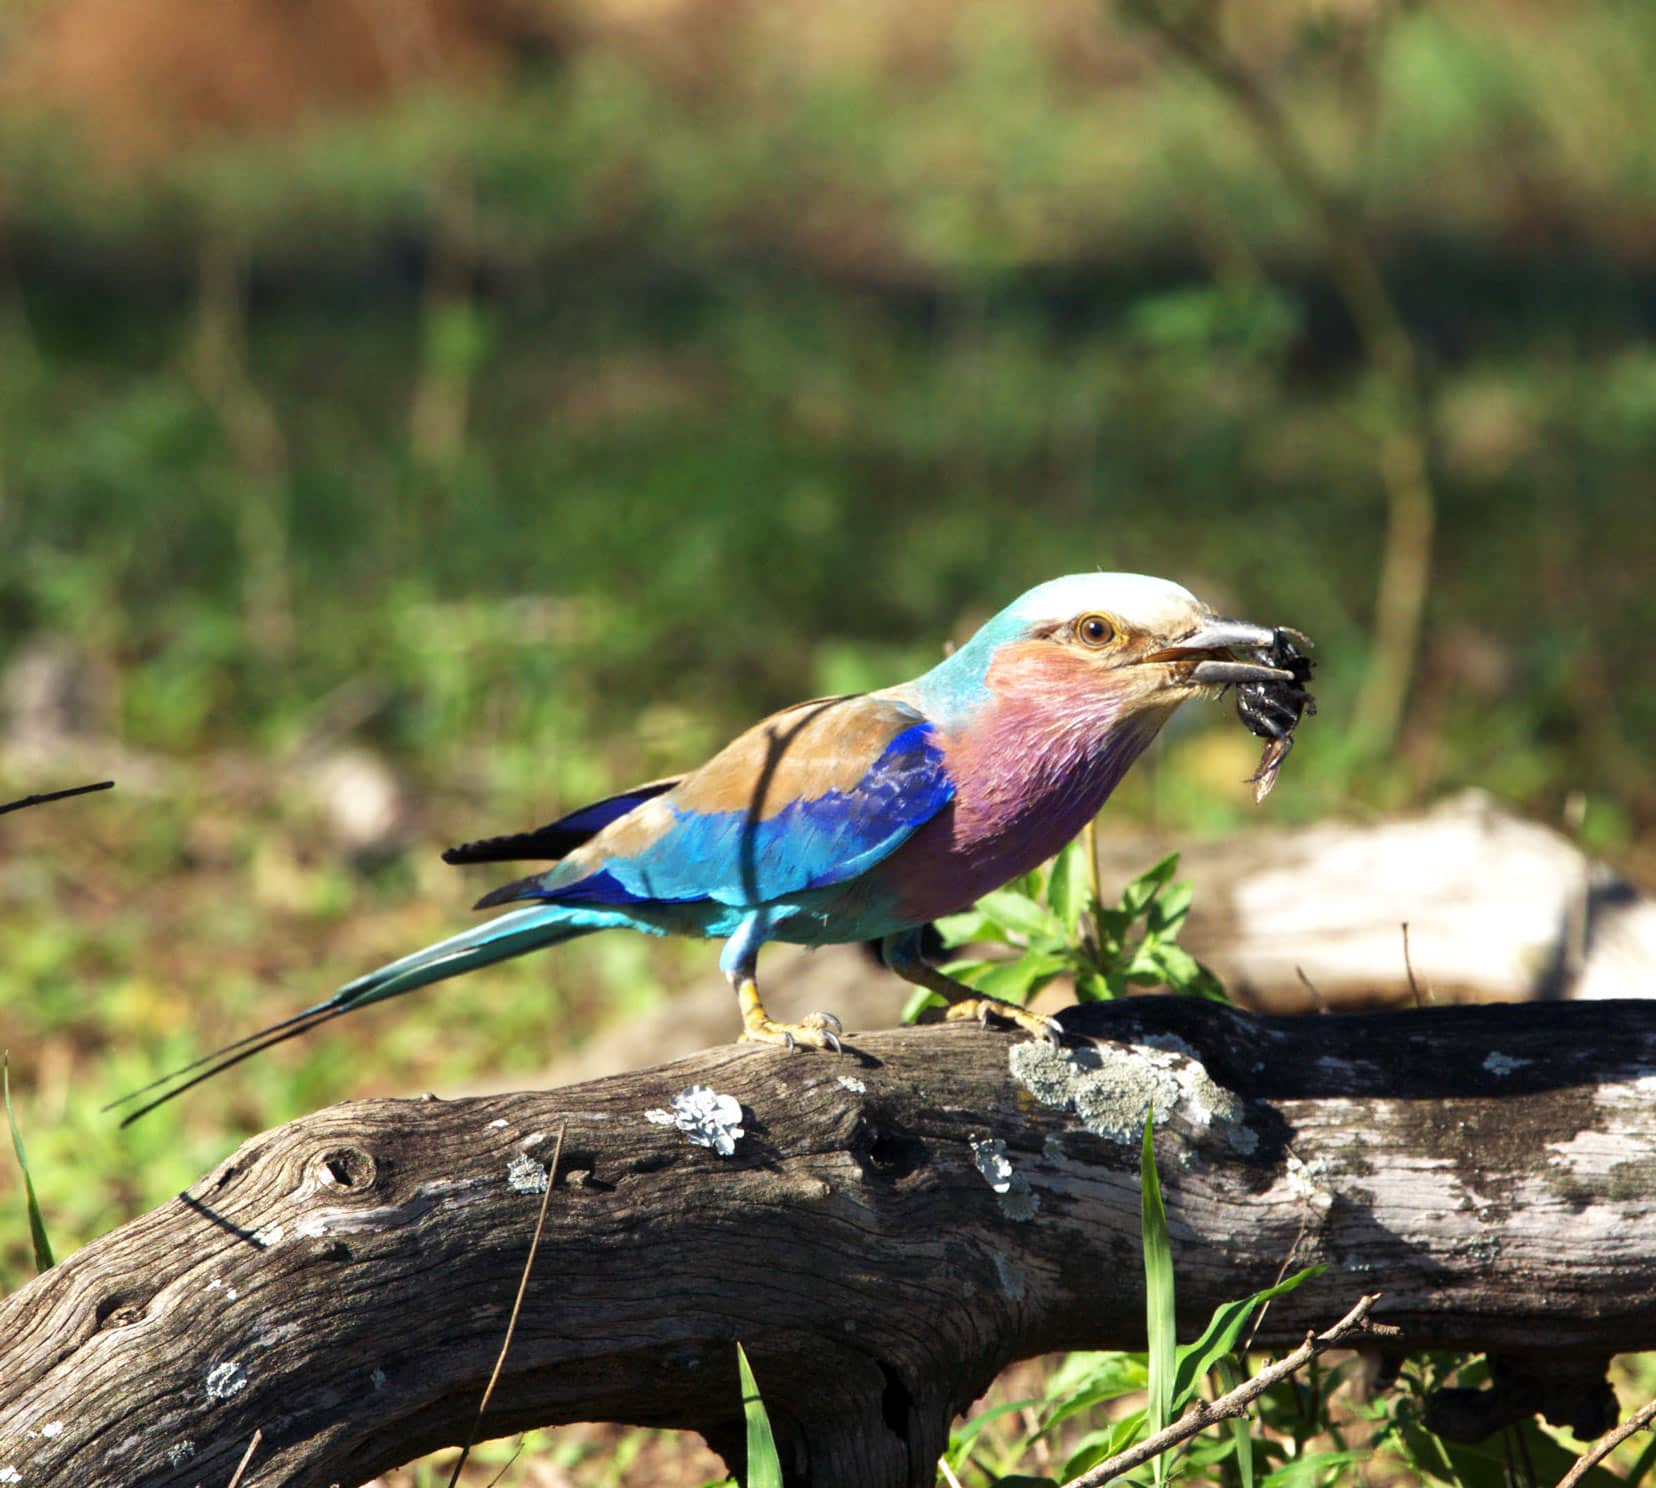 pink chested bird with blue and brown wings, blue tail and white capped head